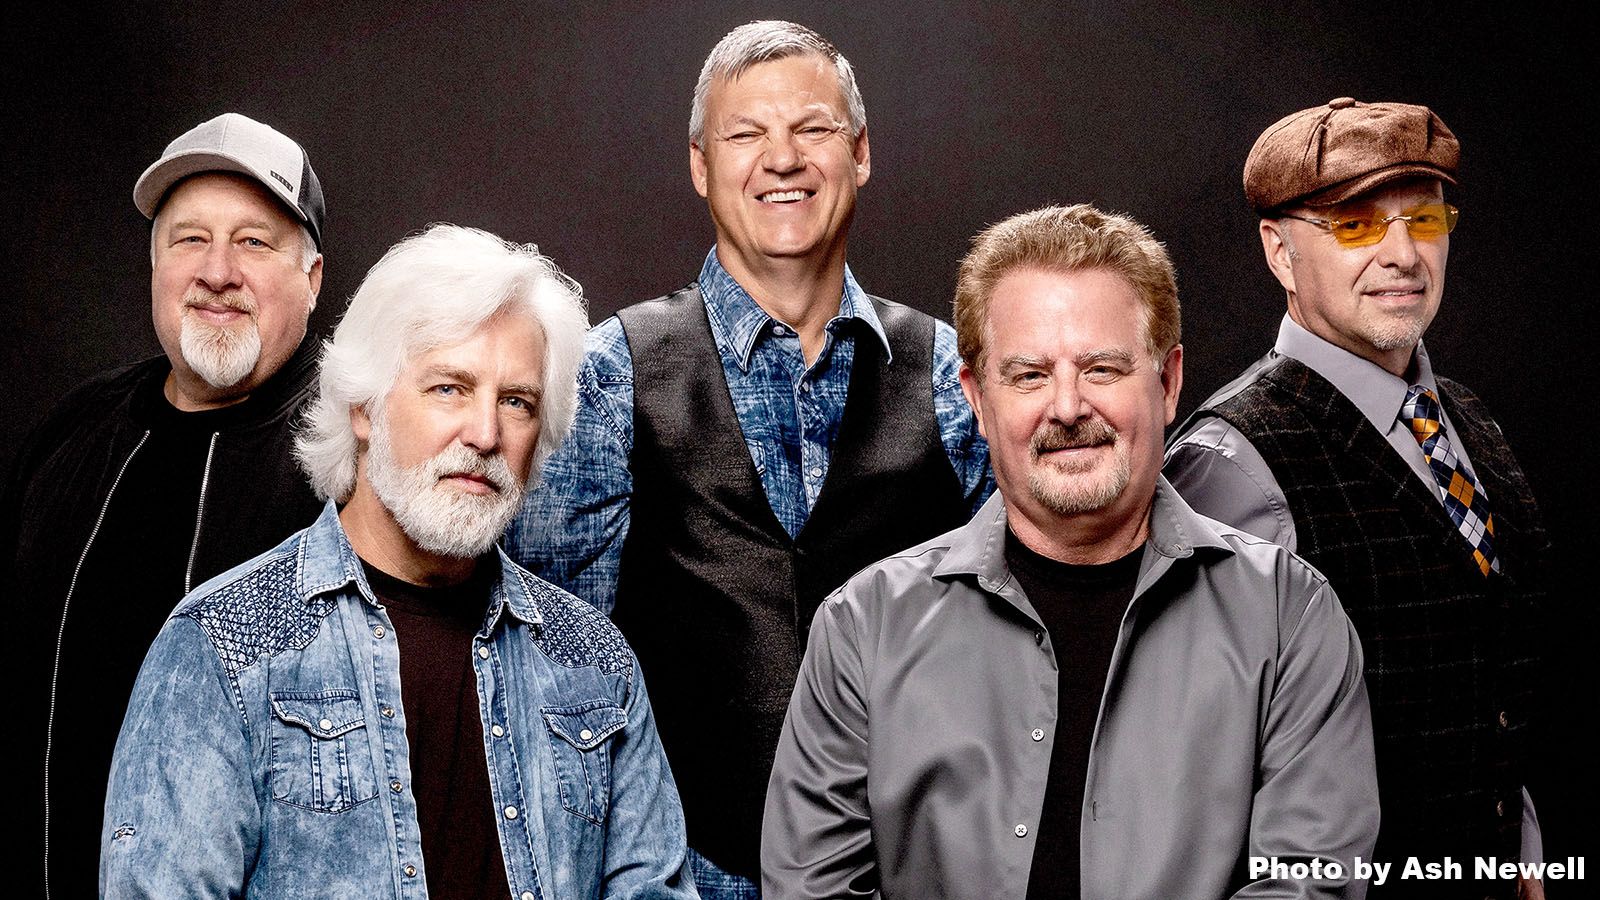 Orleans will be among the acts performing at Embassy Theatre on Friday, July 26, when the Sail On: The Original Yacht Rock Tour pulls into town with Walter Egan and Peter Beckett.